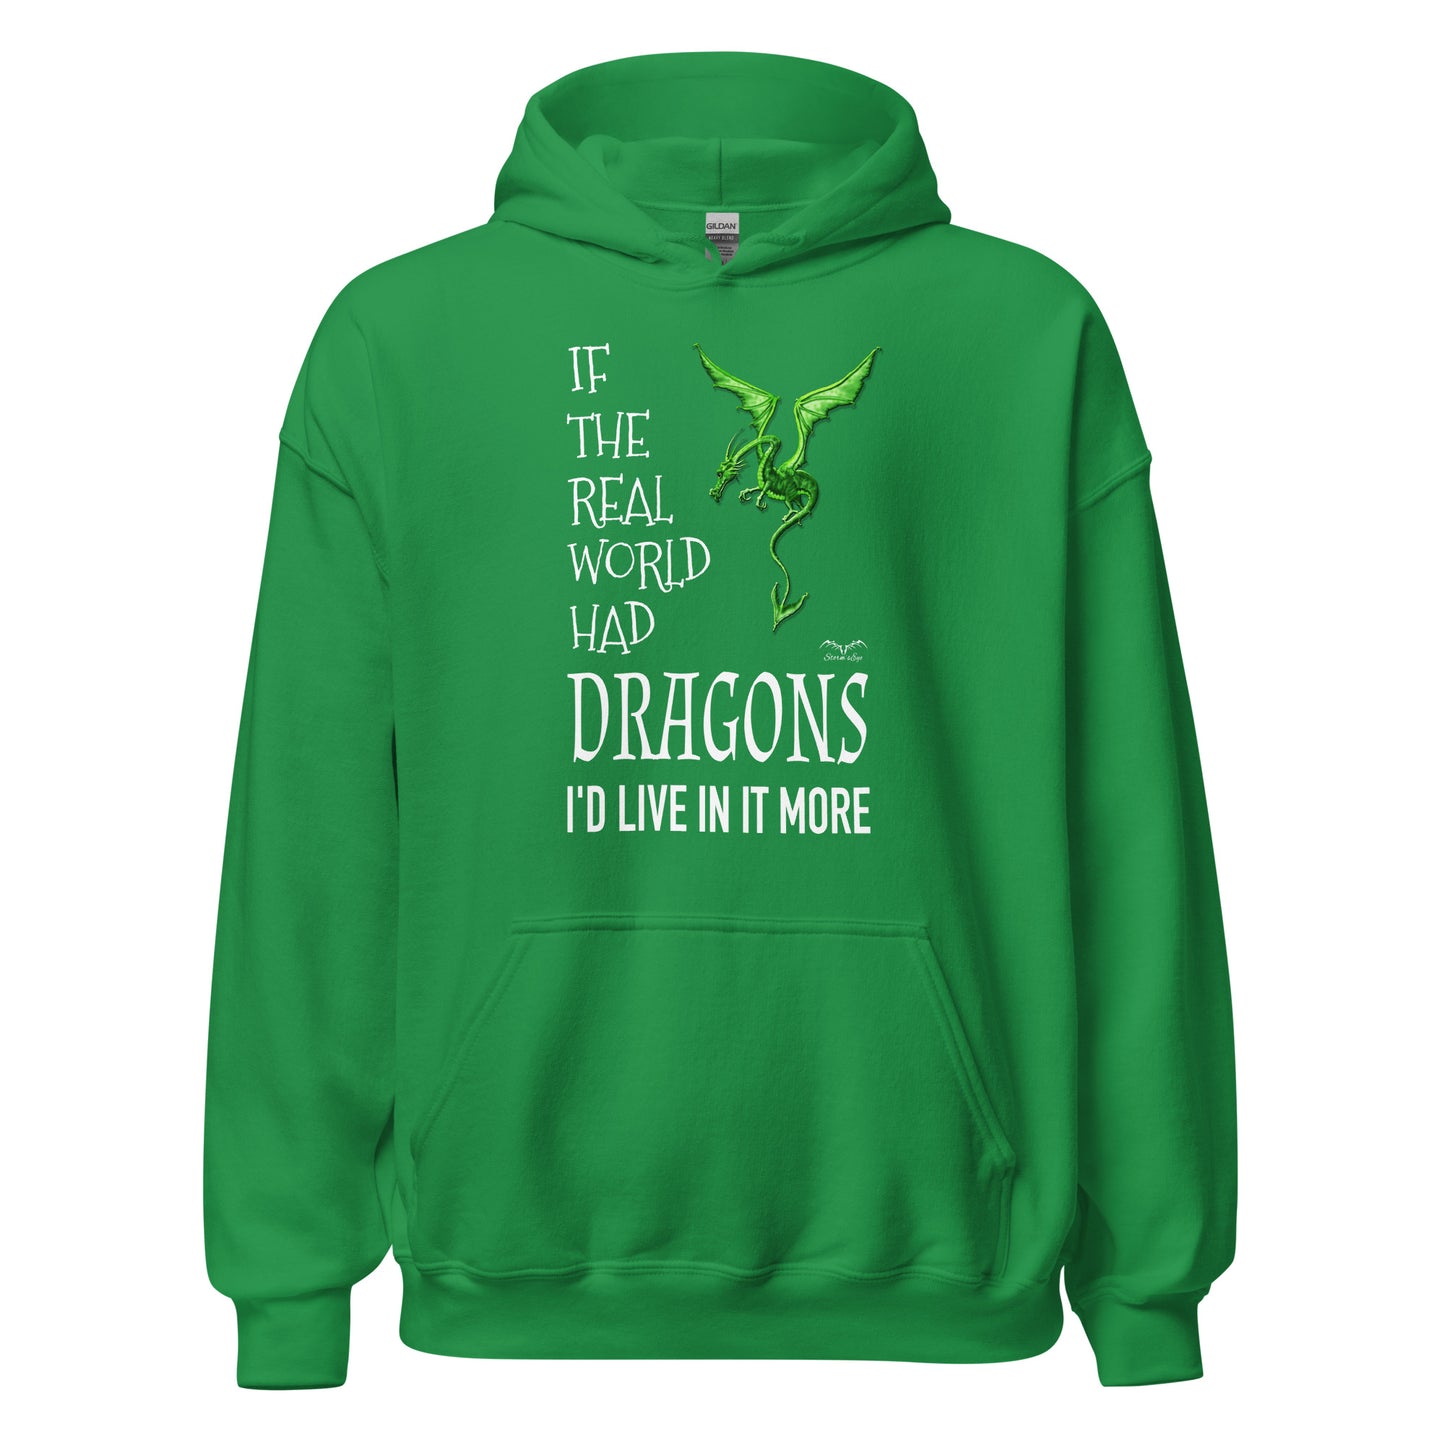 Real World dragons hoodie, bright green, by Stormseye Design